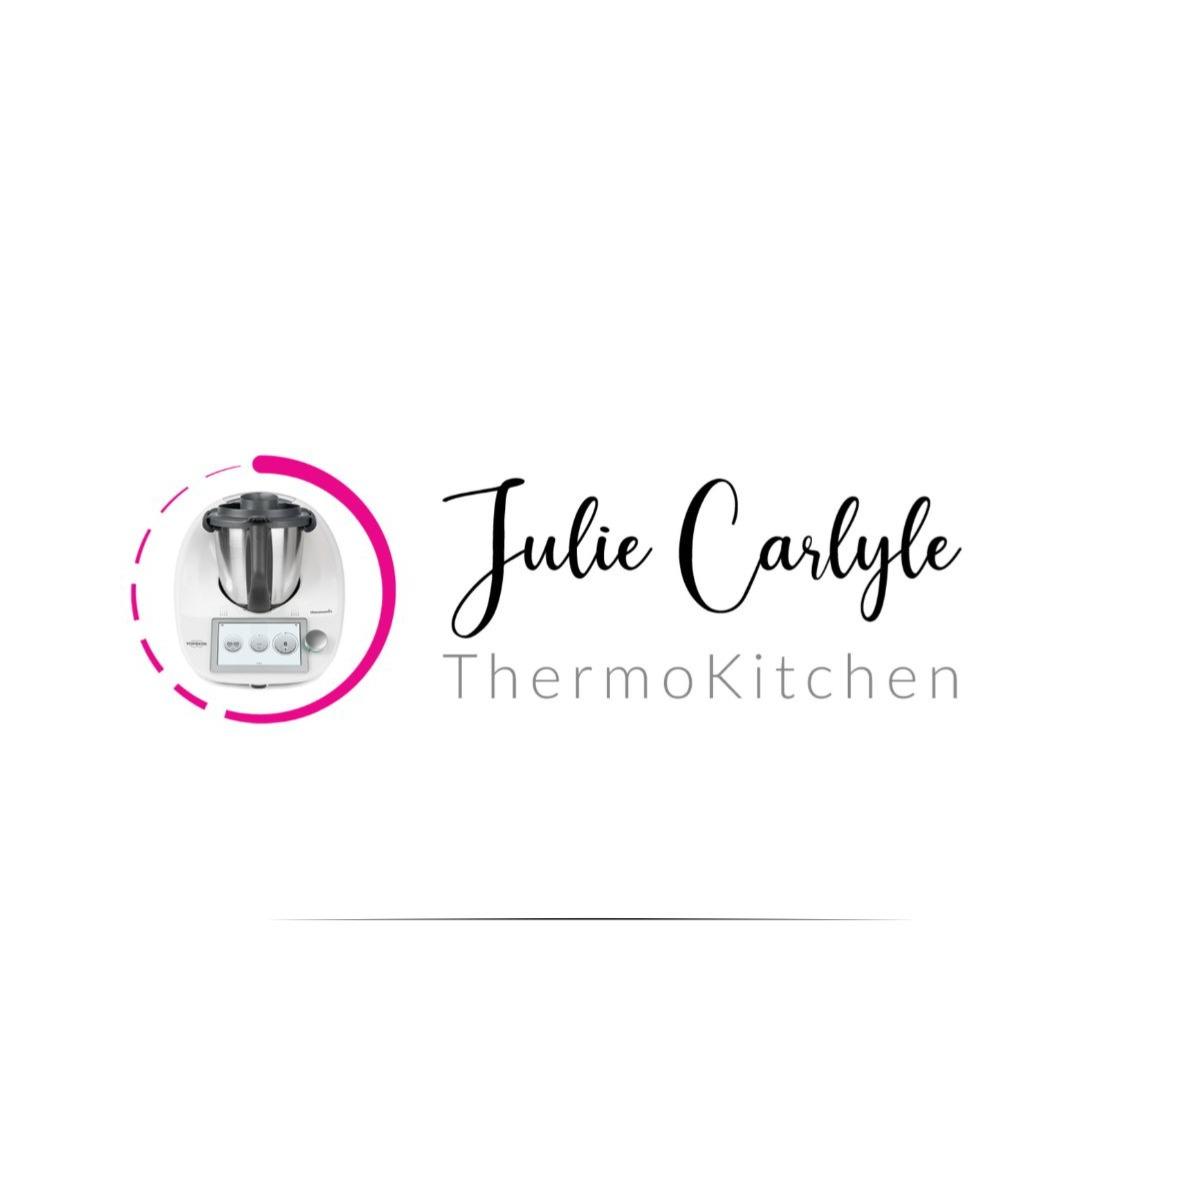 Thermomix Consultant - Julie Carlyle ThermoKitchen Logo